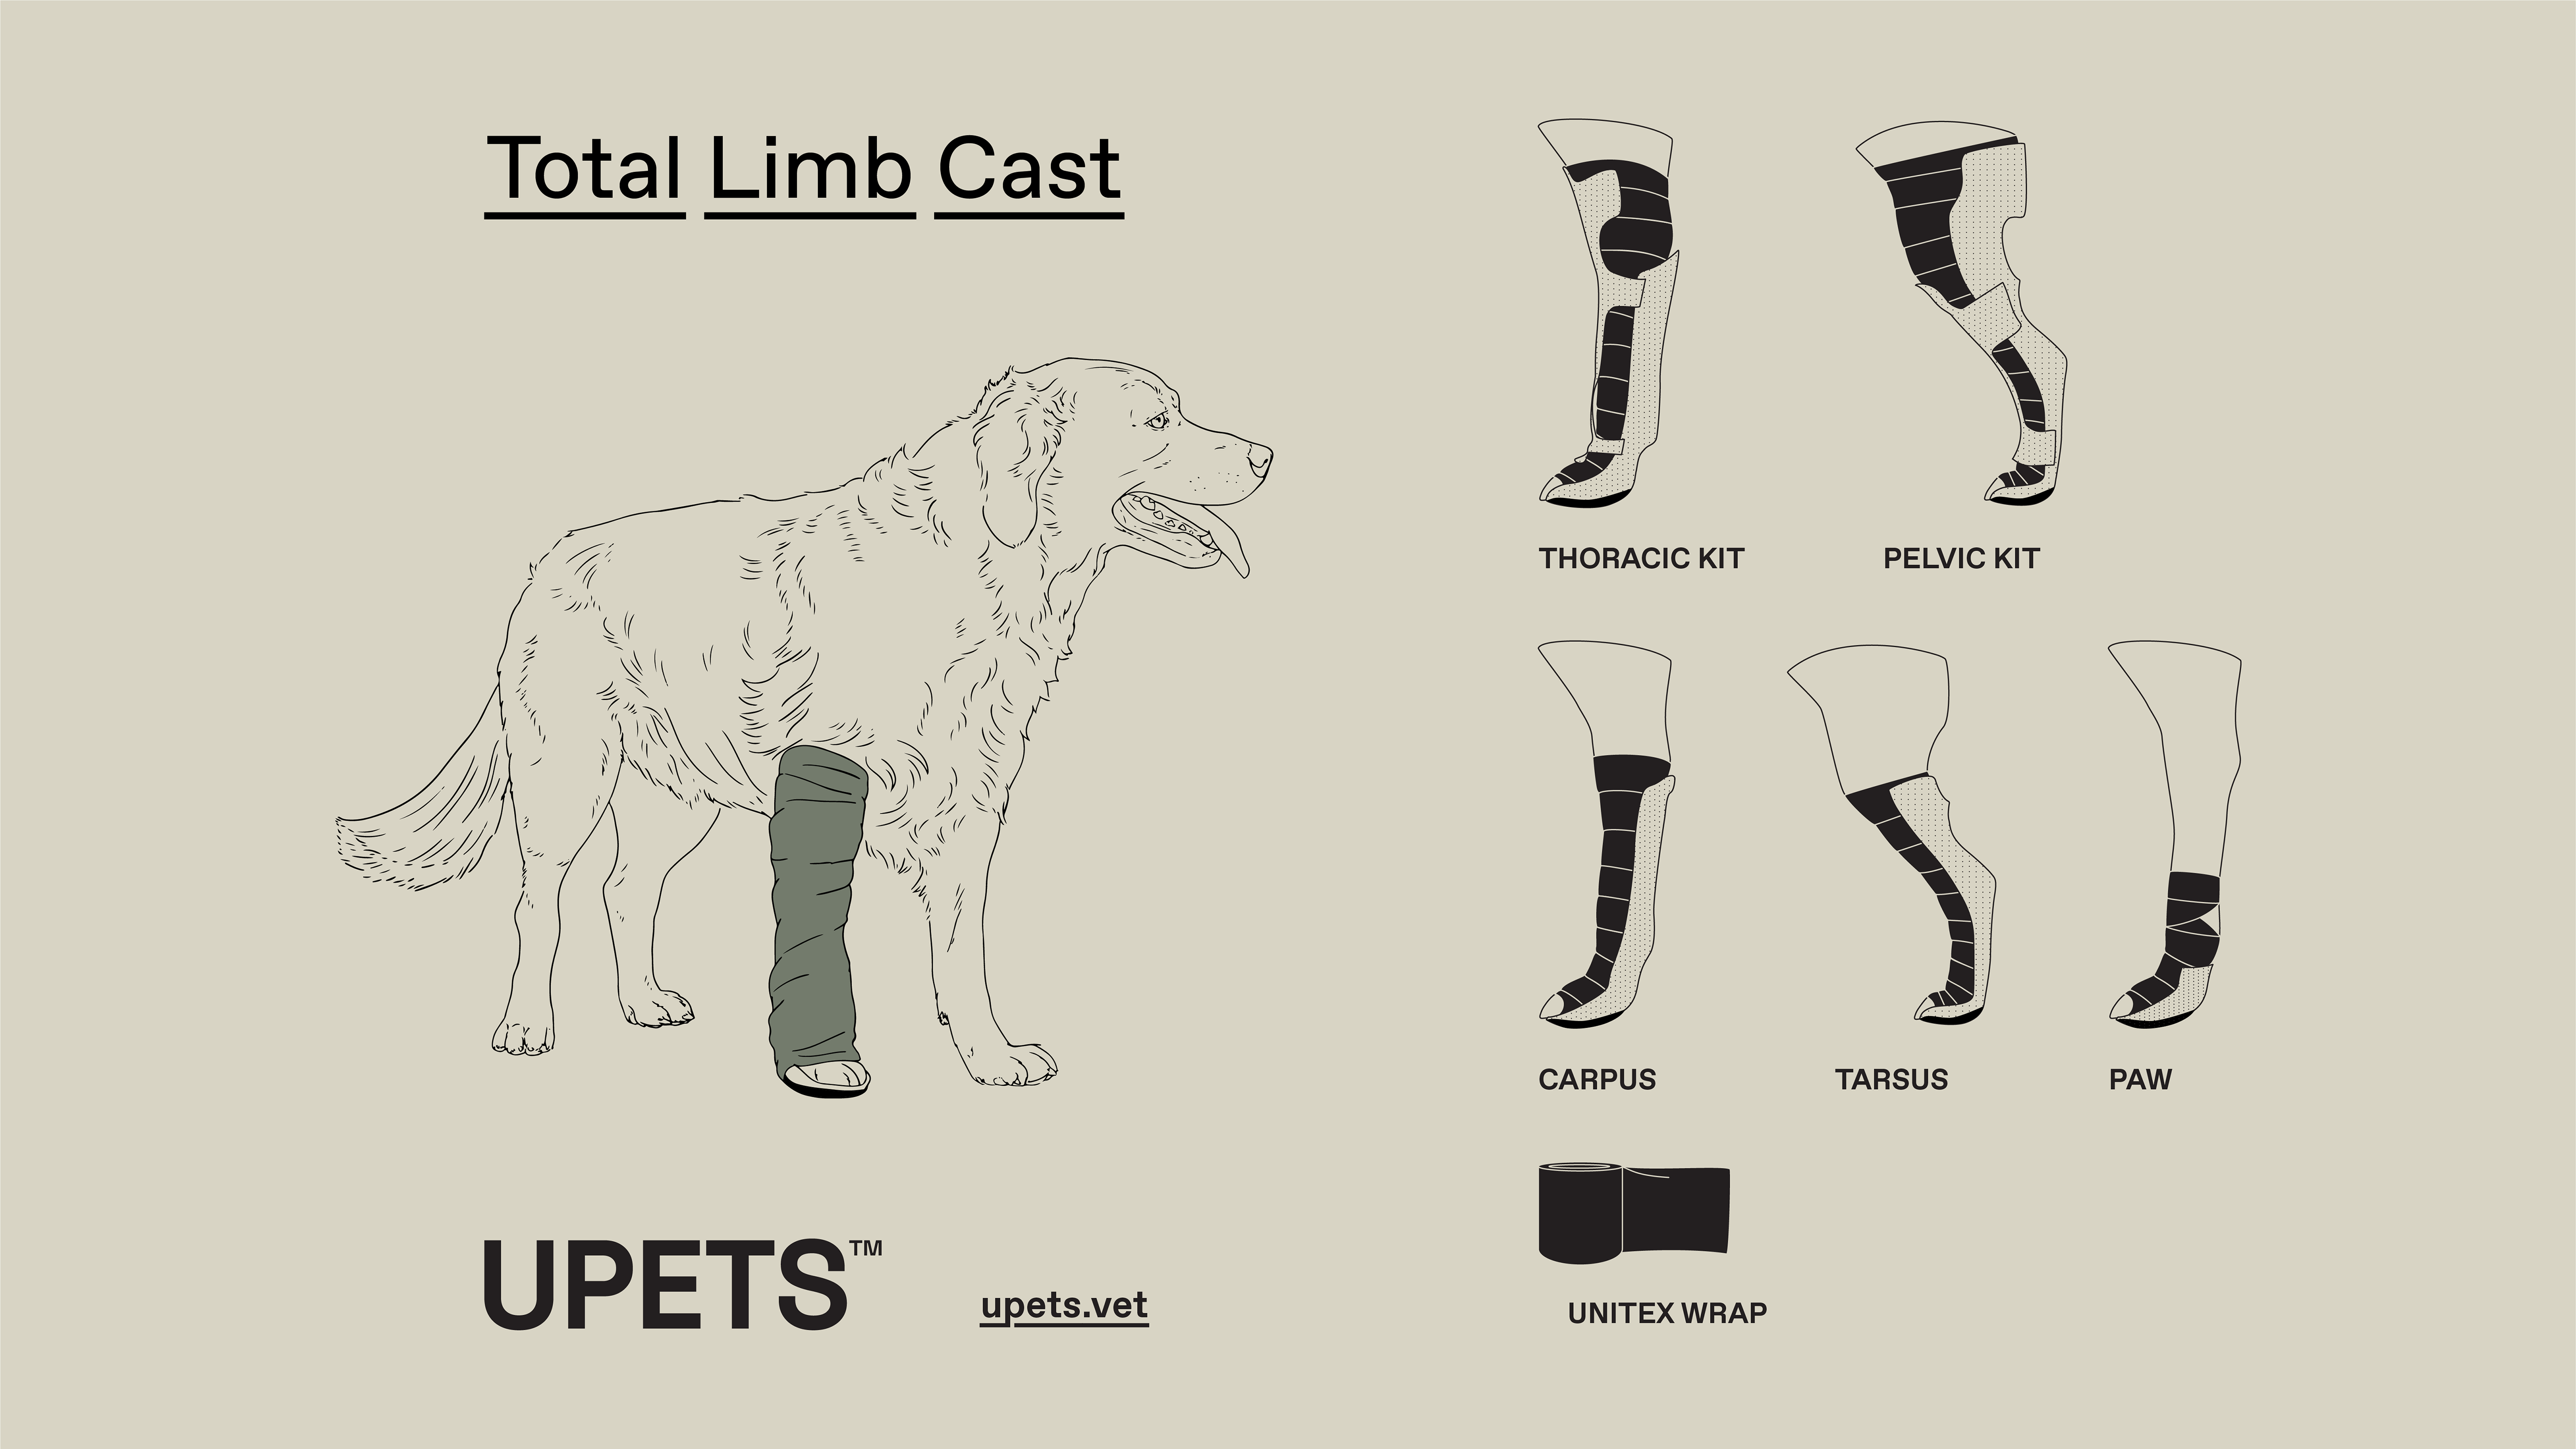 OrthoPets Launches Anatomically Shaped Casts to Eliminate Pressure Sores and to Create a New Standard Care for Pets' Fractures